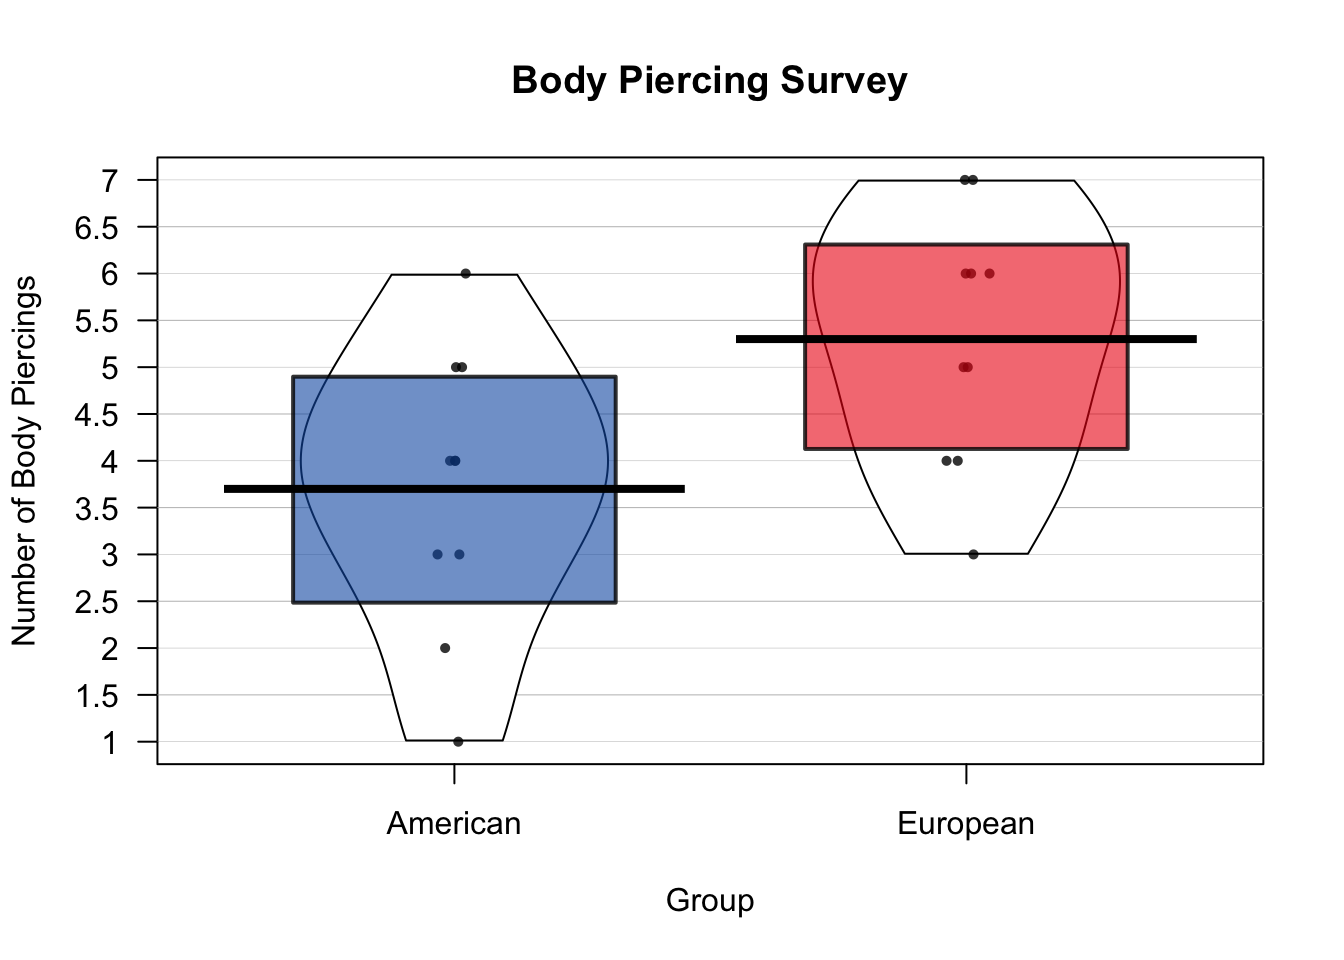 A Pirateplot of the body piercing data.